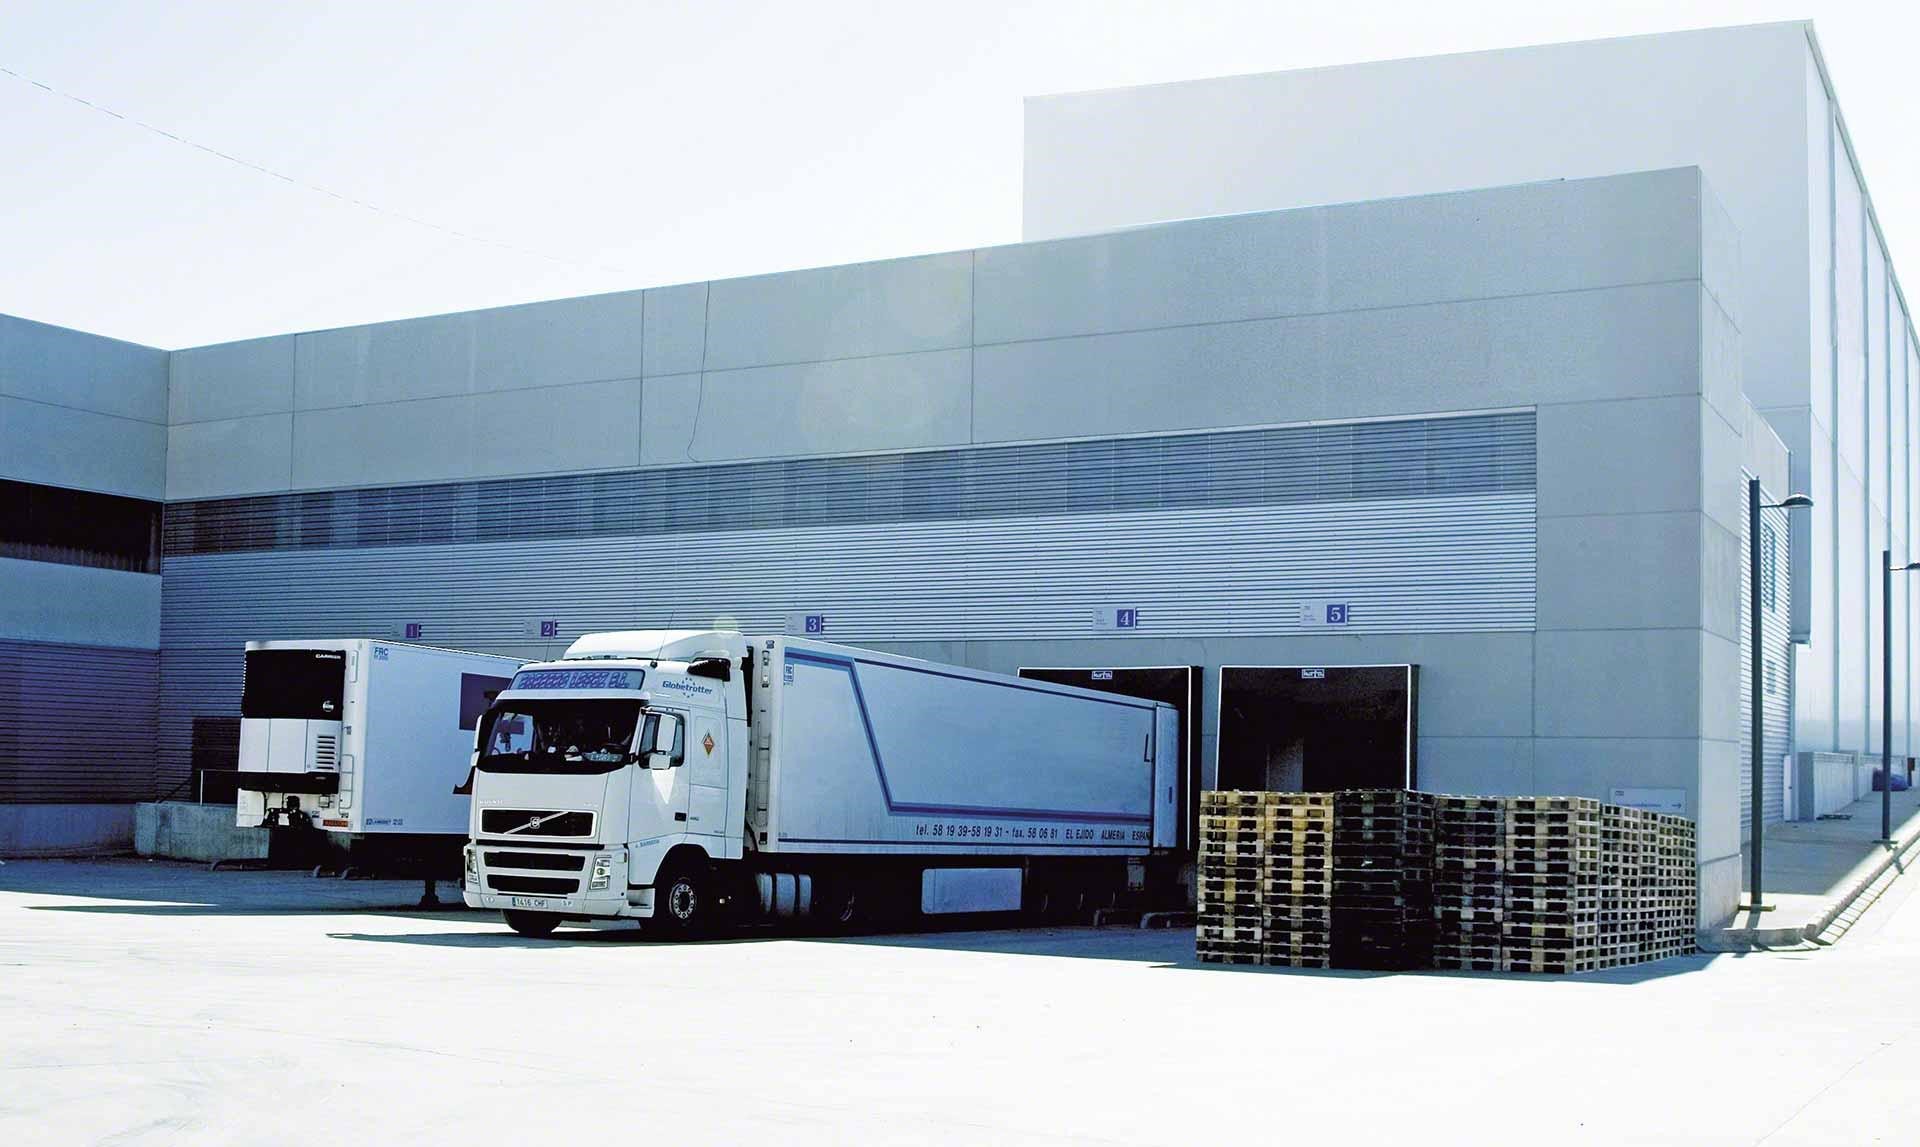 Lorries unload goods in the warehouse as part of cross-docking operations